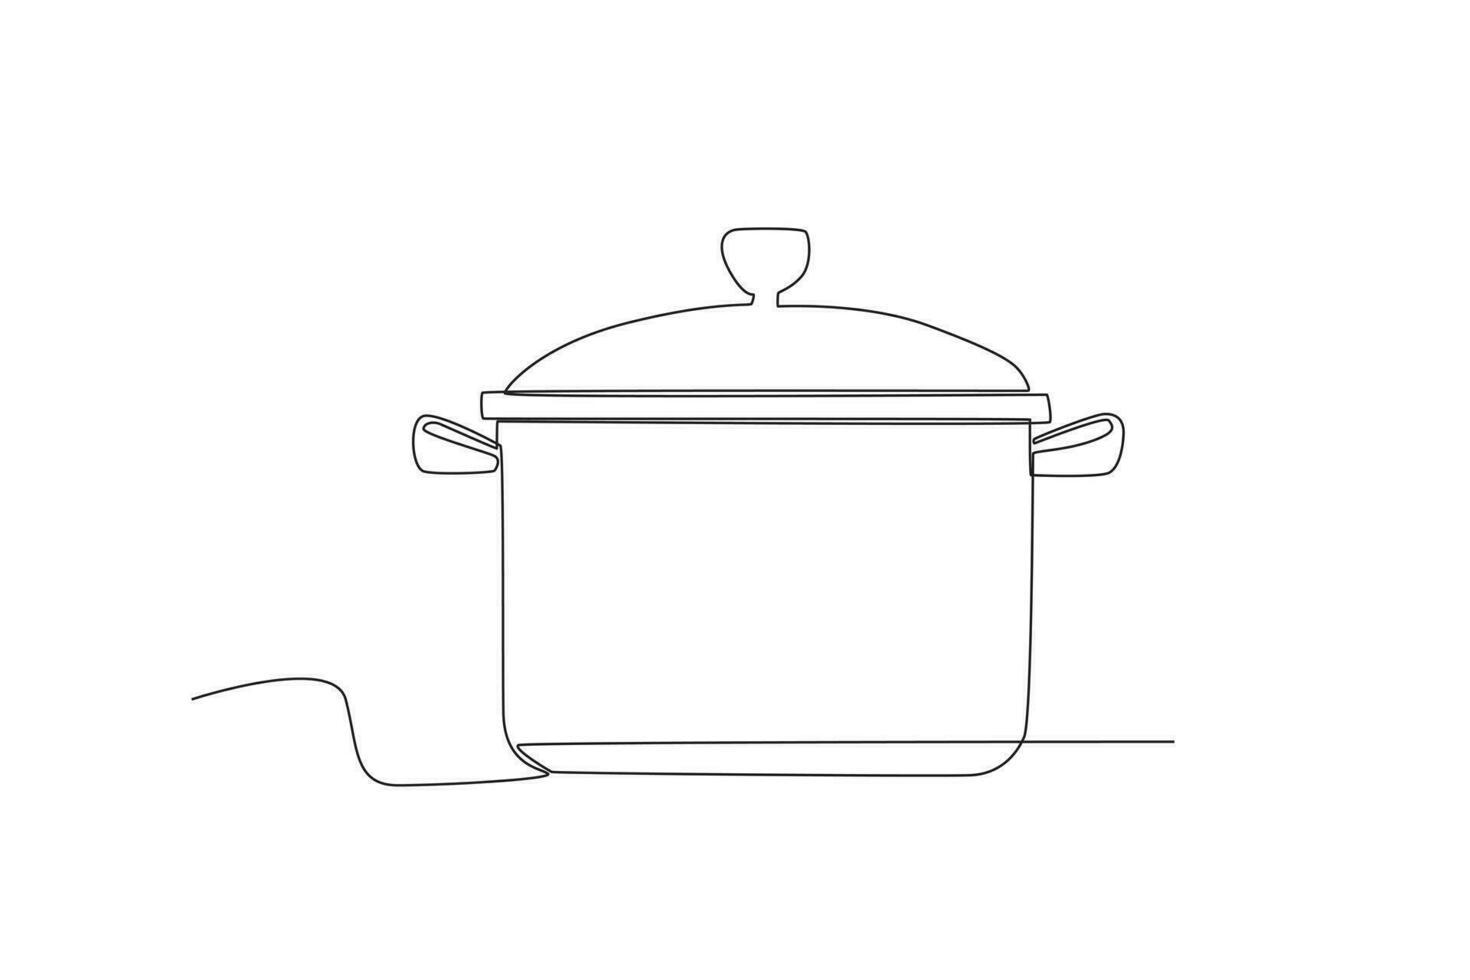 A pot for boiling water vector